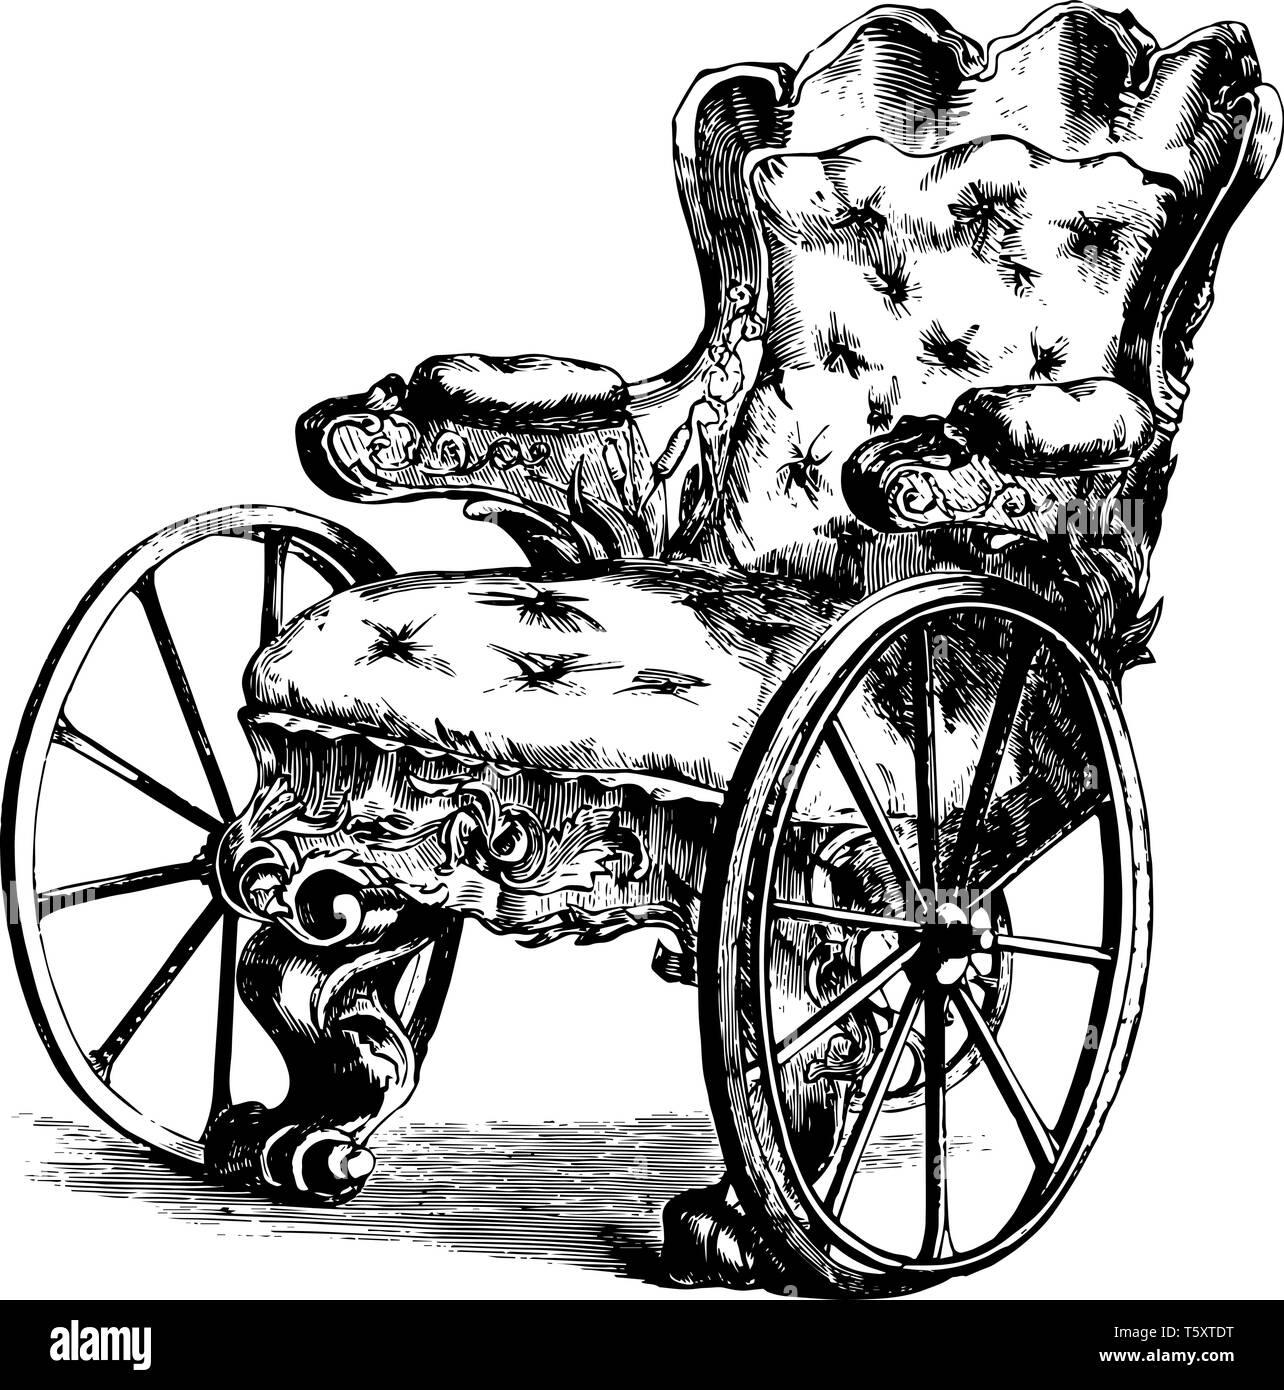 Wheelchair designed for mobility of sick people had 2 large wheels at front and one small wheel at back, vintage line drawing or engraving illustratio Stock Vector